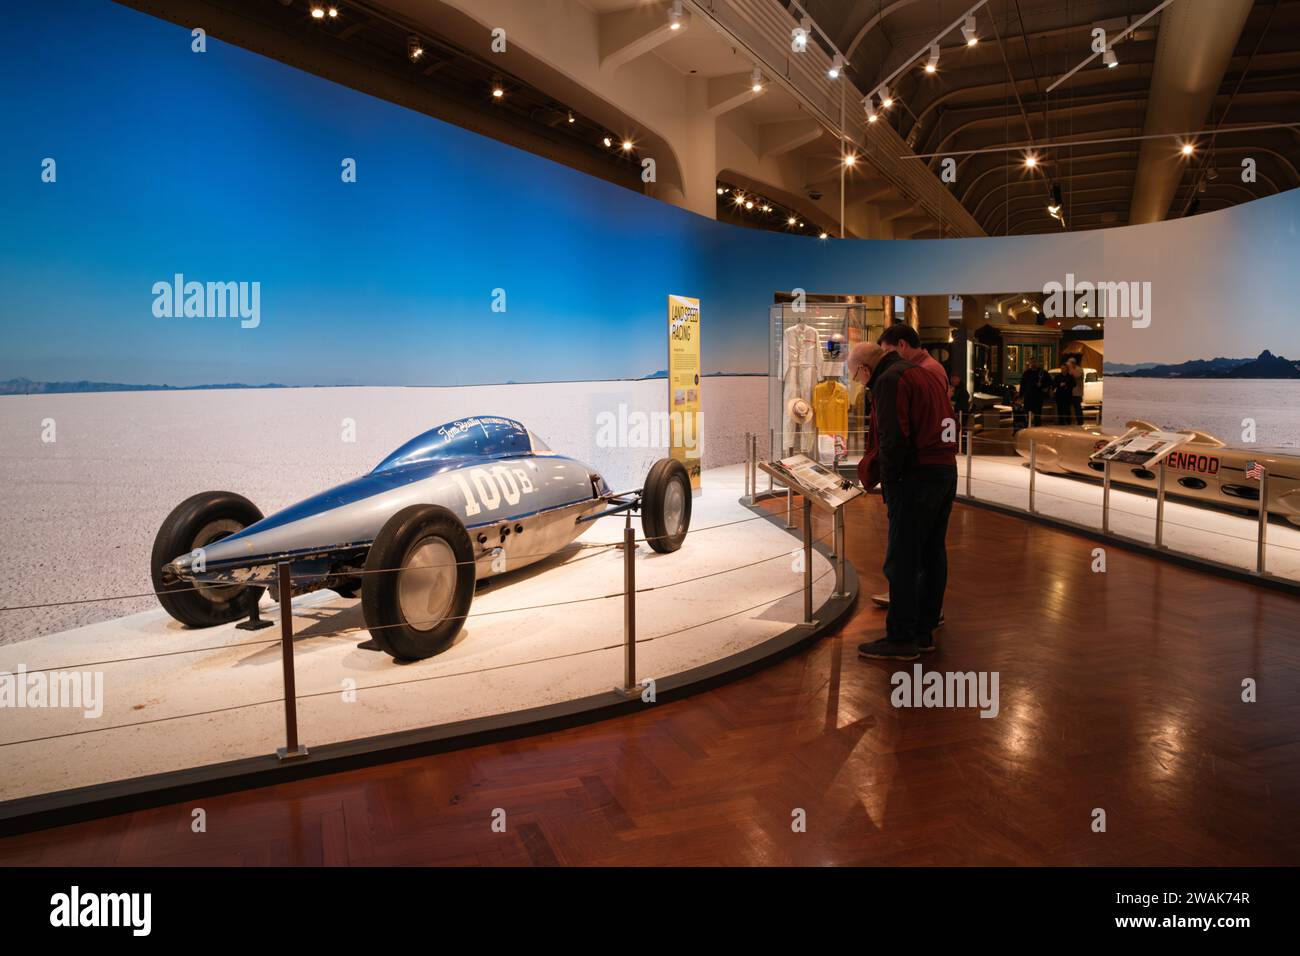 1951 Beatty Belly Tank Lakester Land Speed record car in mostra presso l'Henry Ford Museum of American Innovation, Dearborn Michigan USA Foto Stock